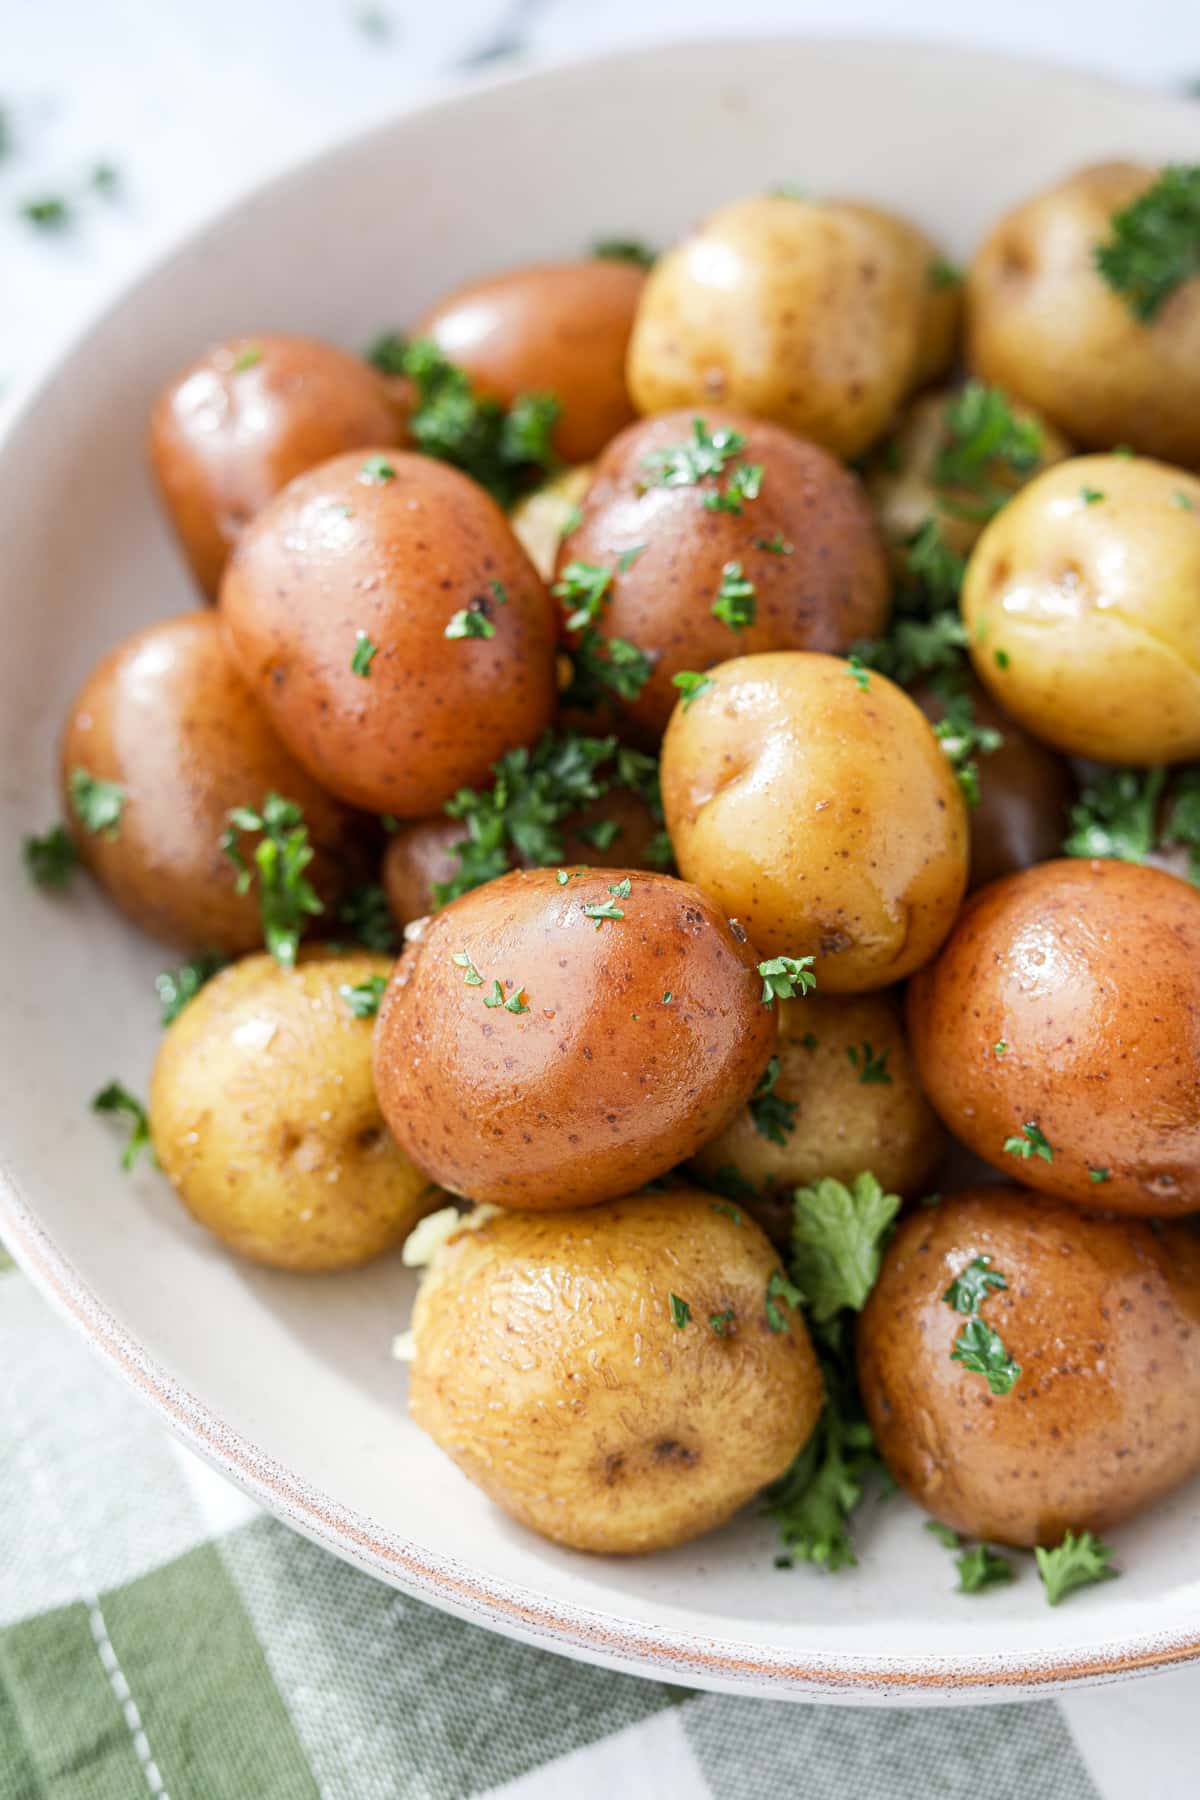 A bowl of steamed small potatoes garnished with parsley.